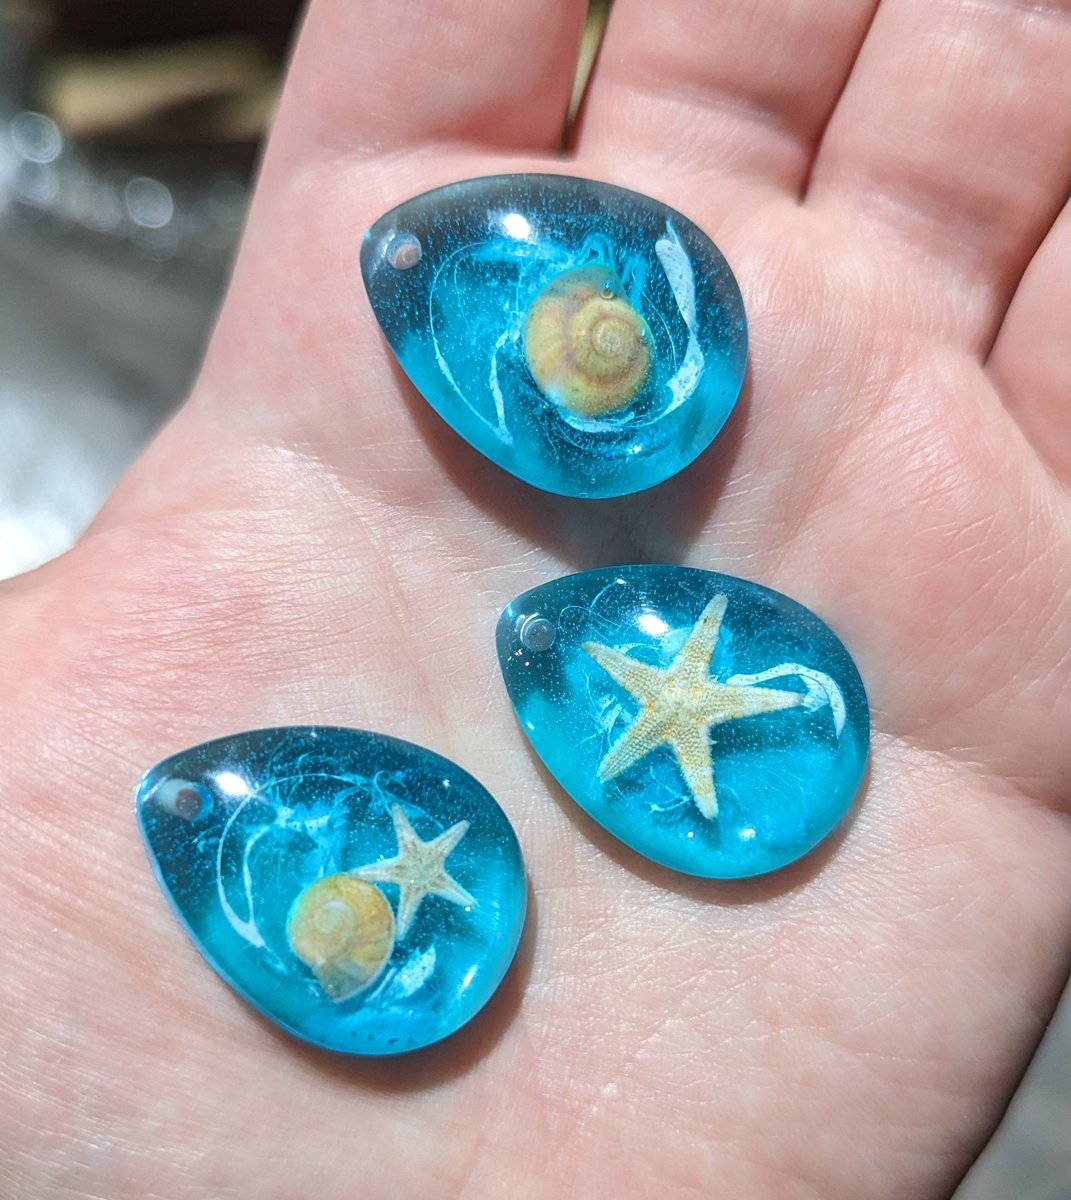 AREN'T THEY CUTE?! 
I was so pleased with how they turned out. These little pendants might soon be making their way onto my Etsy...

#resin #resinjewelry #handmade #shelljewelry #fox